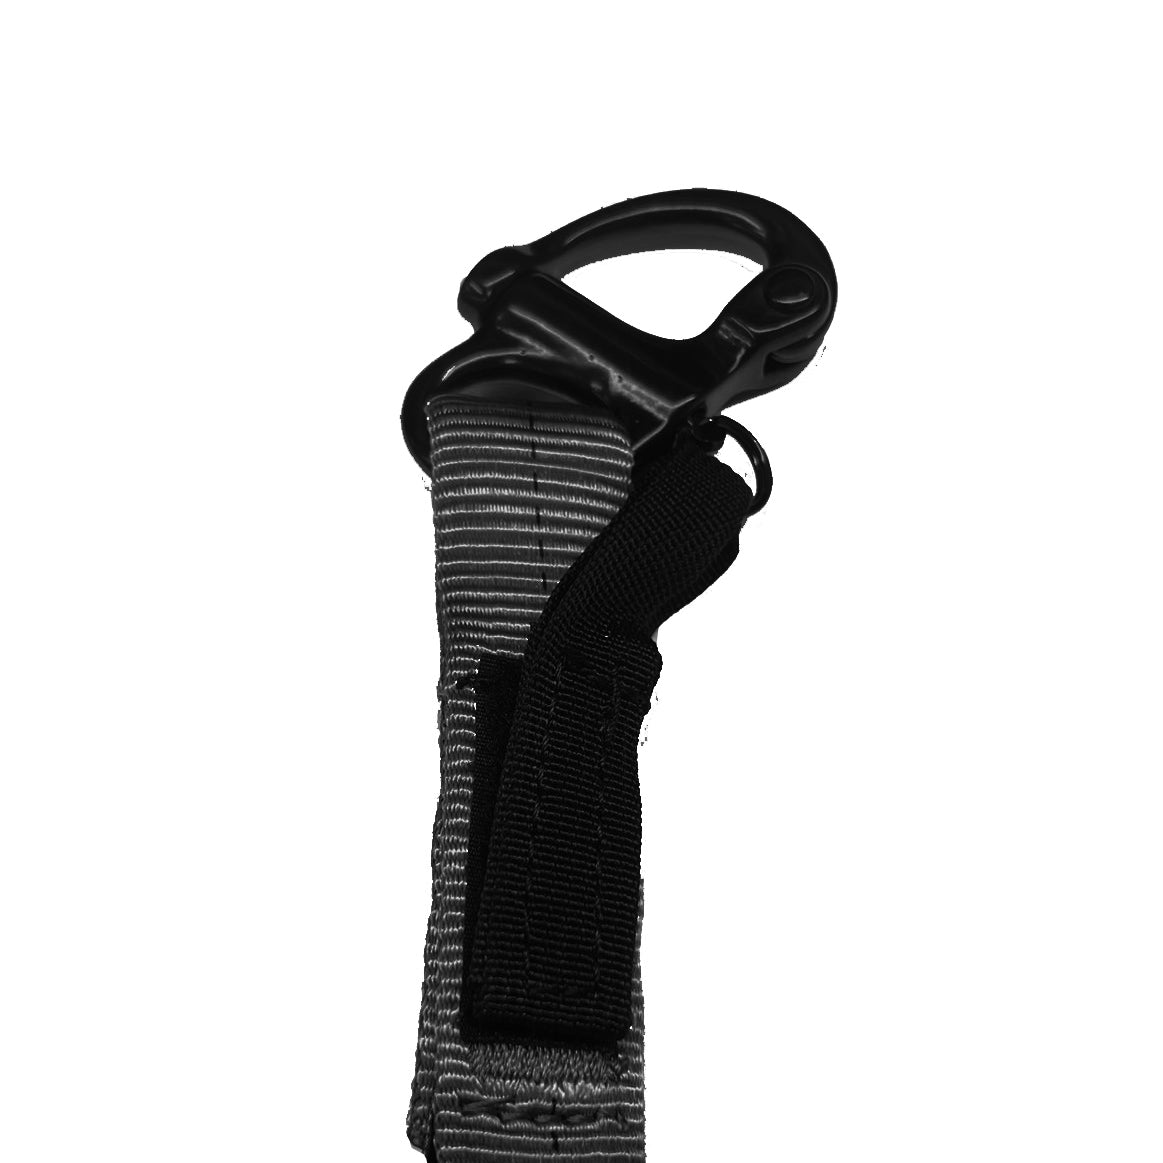 Helo Retention Lanyard BLK Kong Frog Cable & Plunger Pin Shackle